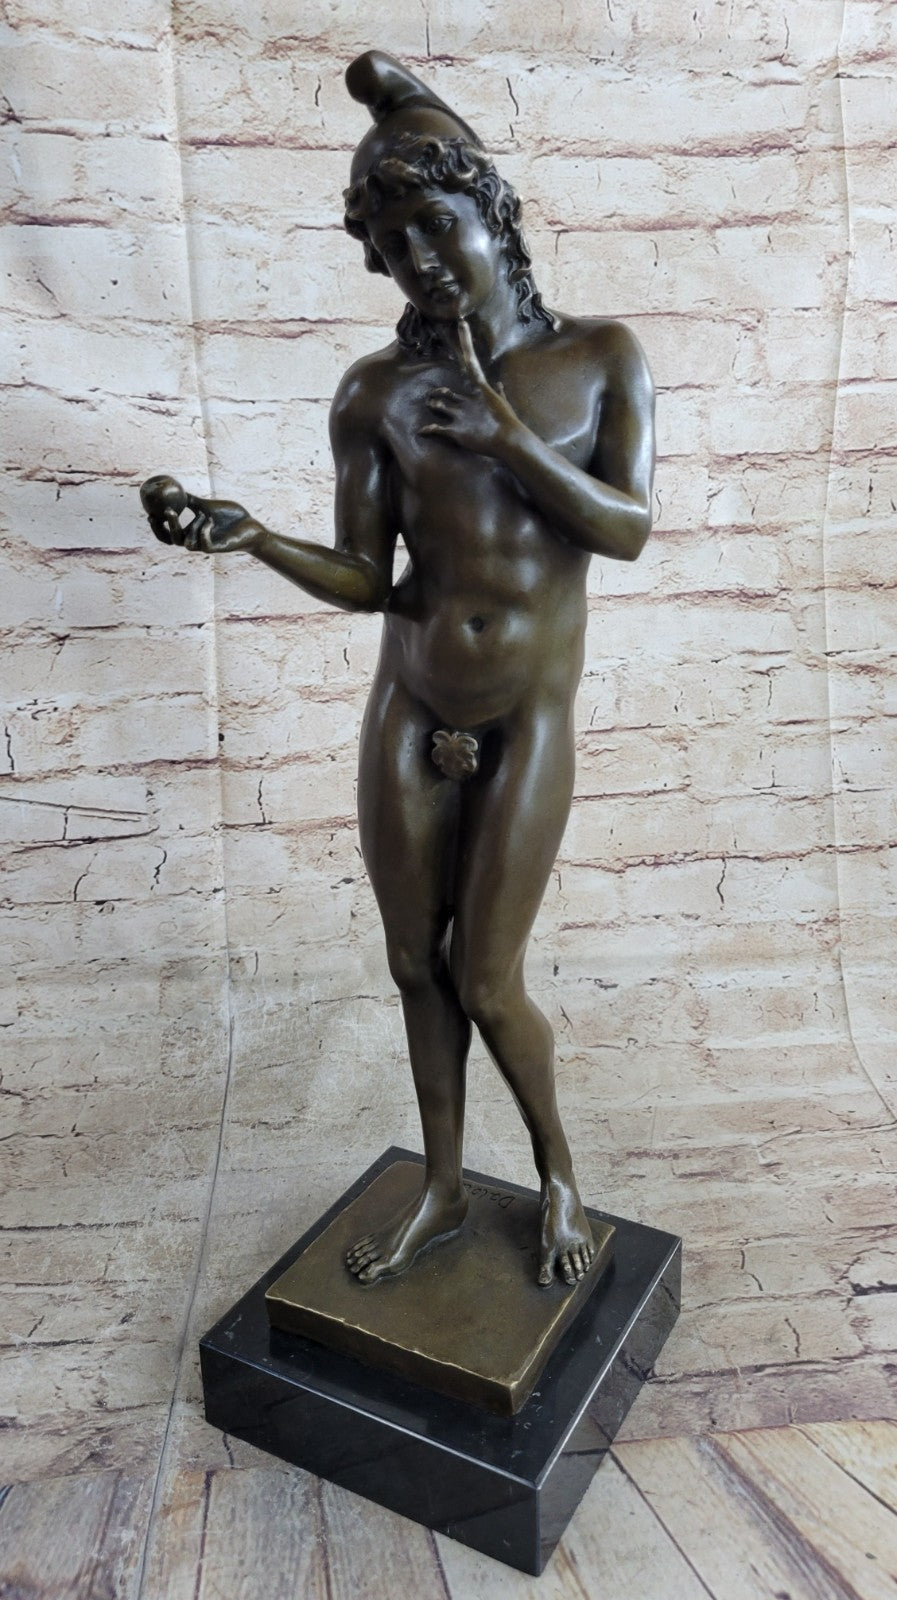 SIGNED LIMITED EDITION BRONZE SCULPTURE NUDE MALE ADAM STATUE ON MARBLE BASE